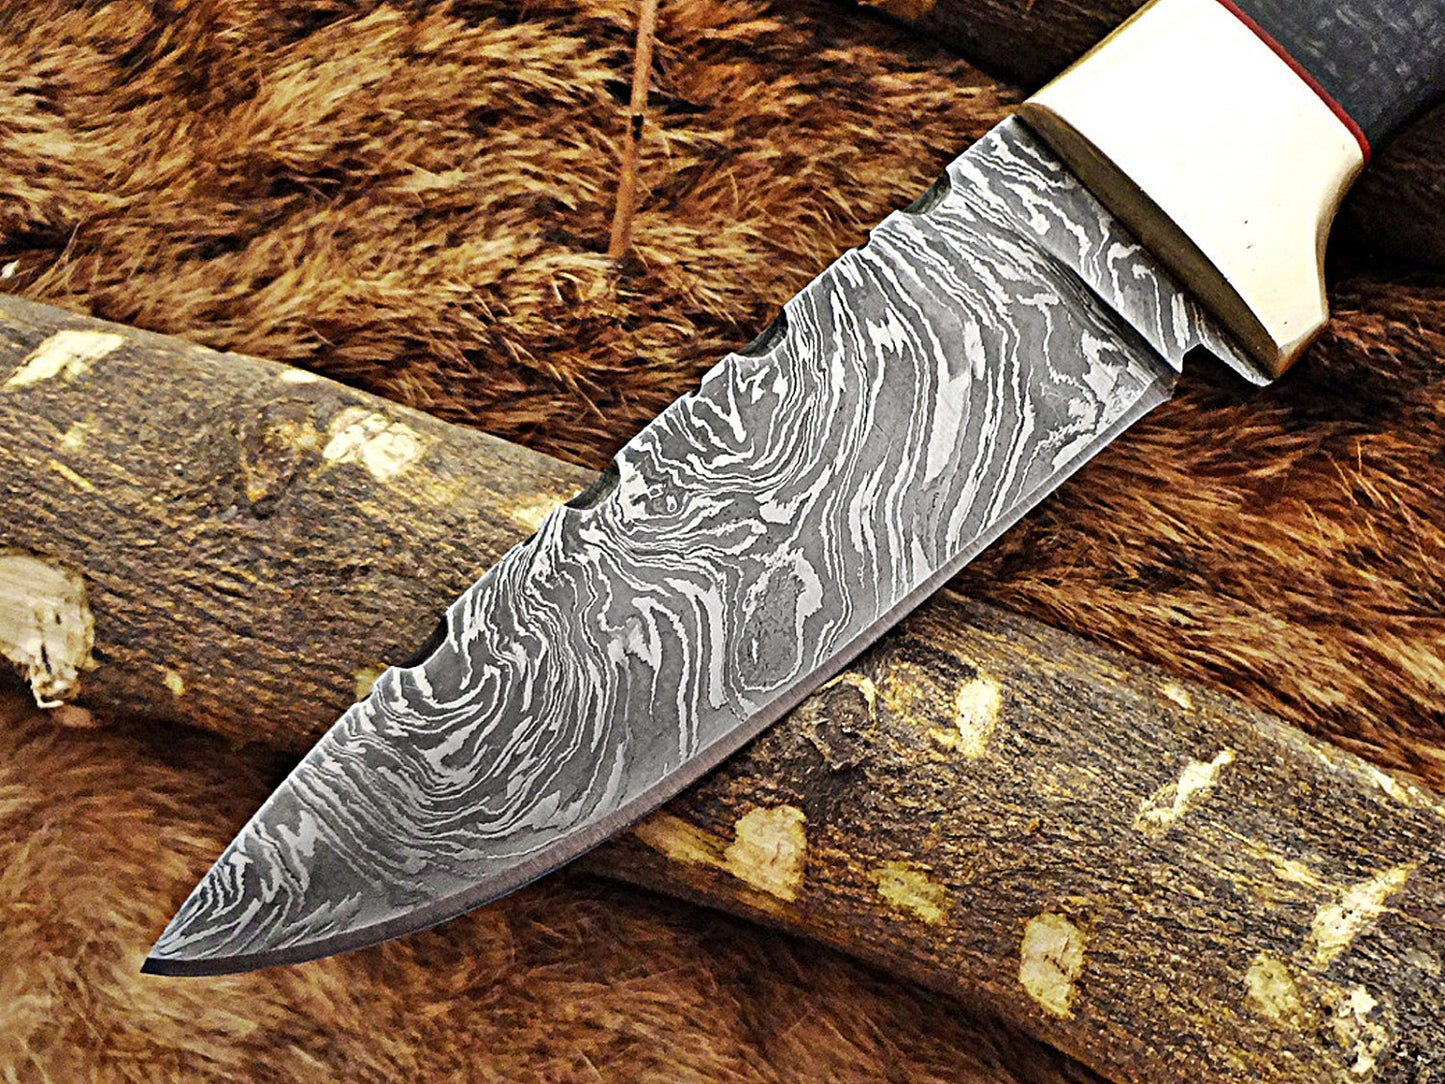 8.5" Long hand forged Damascus steel skinning knife, 4" full tang blade, Solid and 2 tone black scales available, Cow hide Leather sheath included